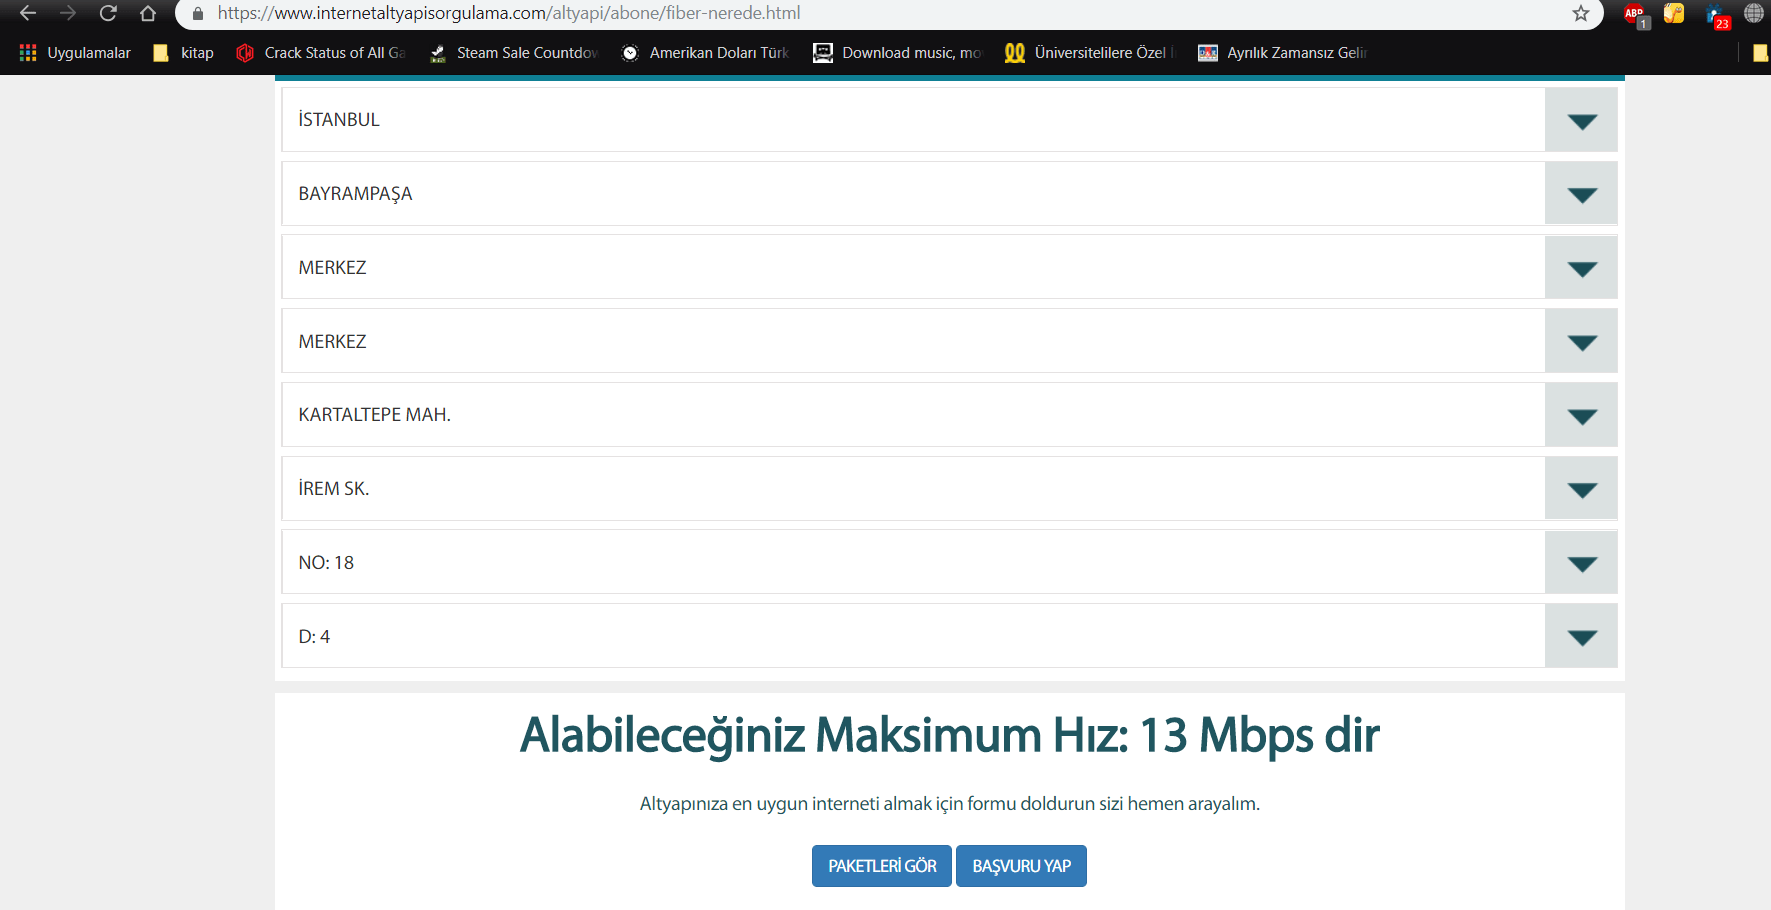 adsl.PNG